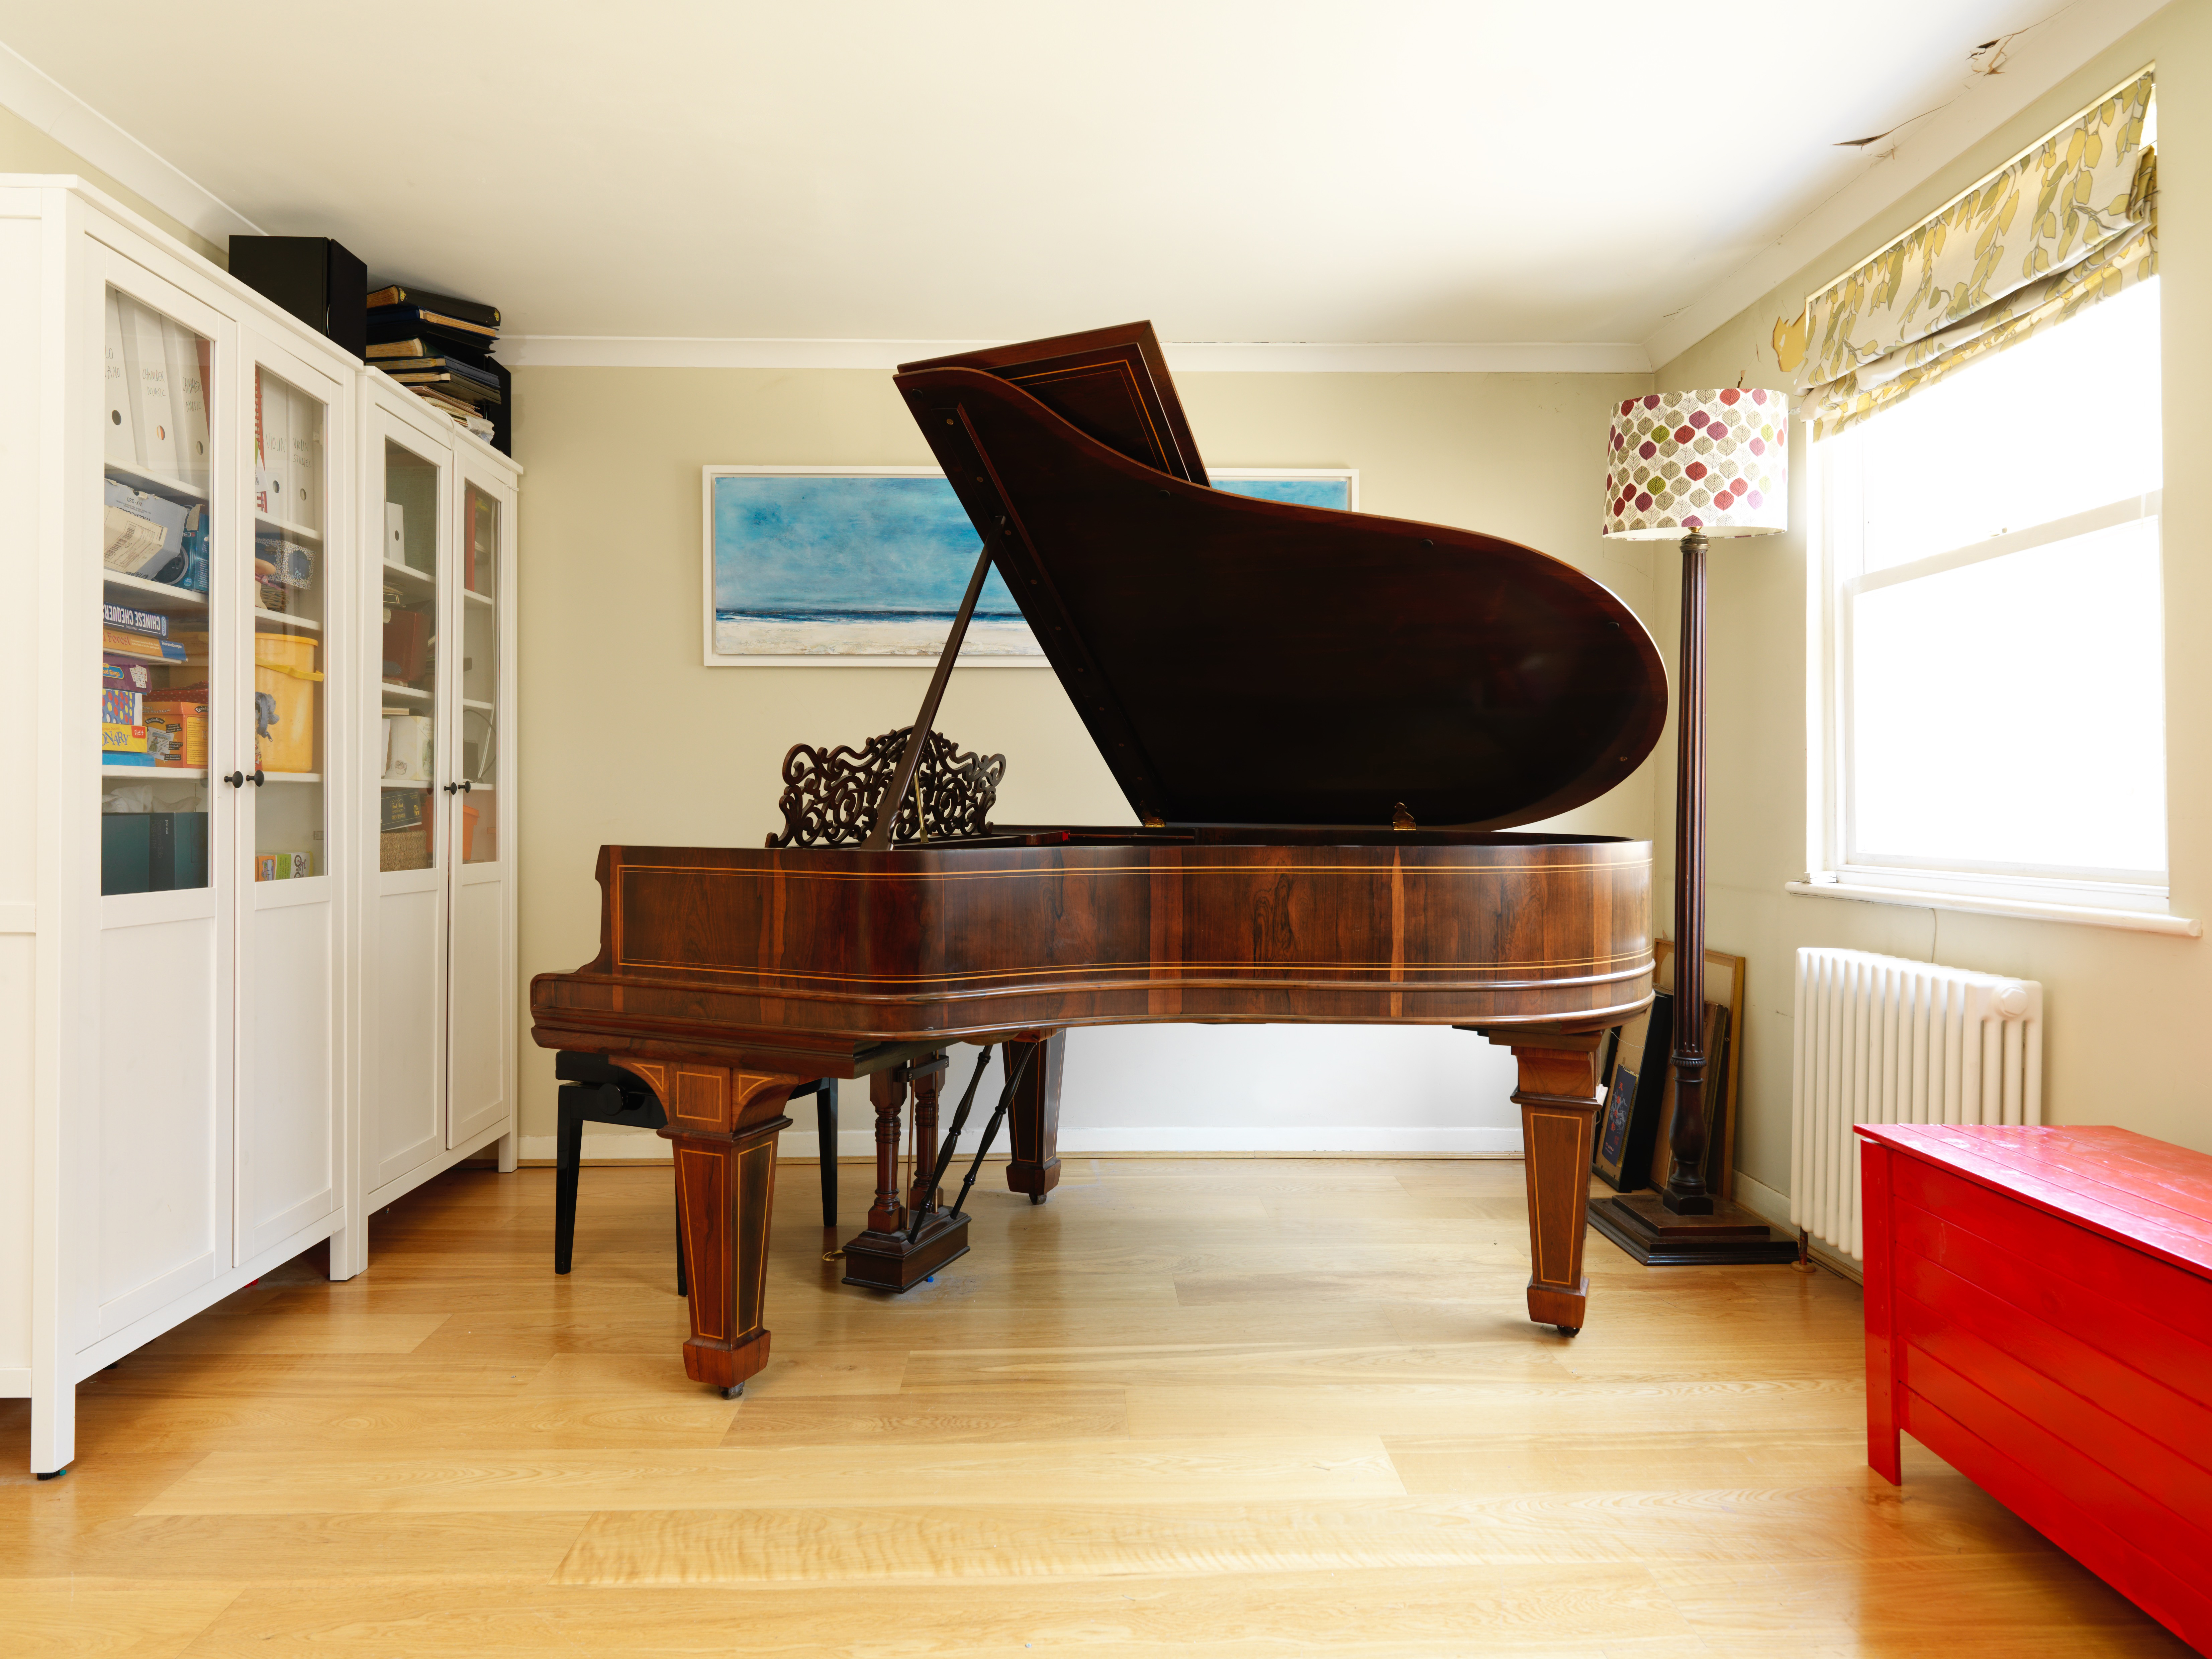 A grand piano in a room with a white bookcase and a red chest